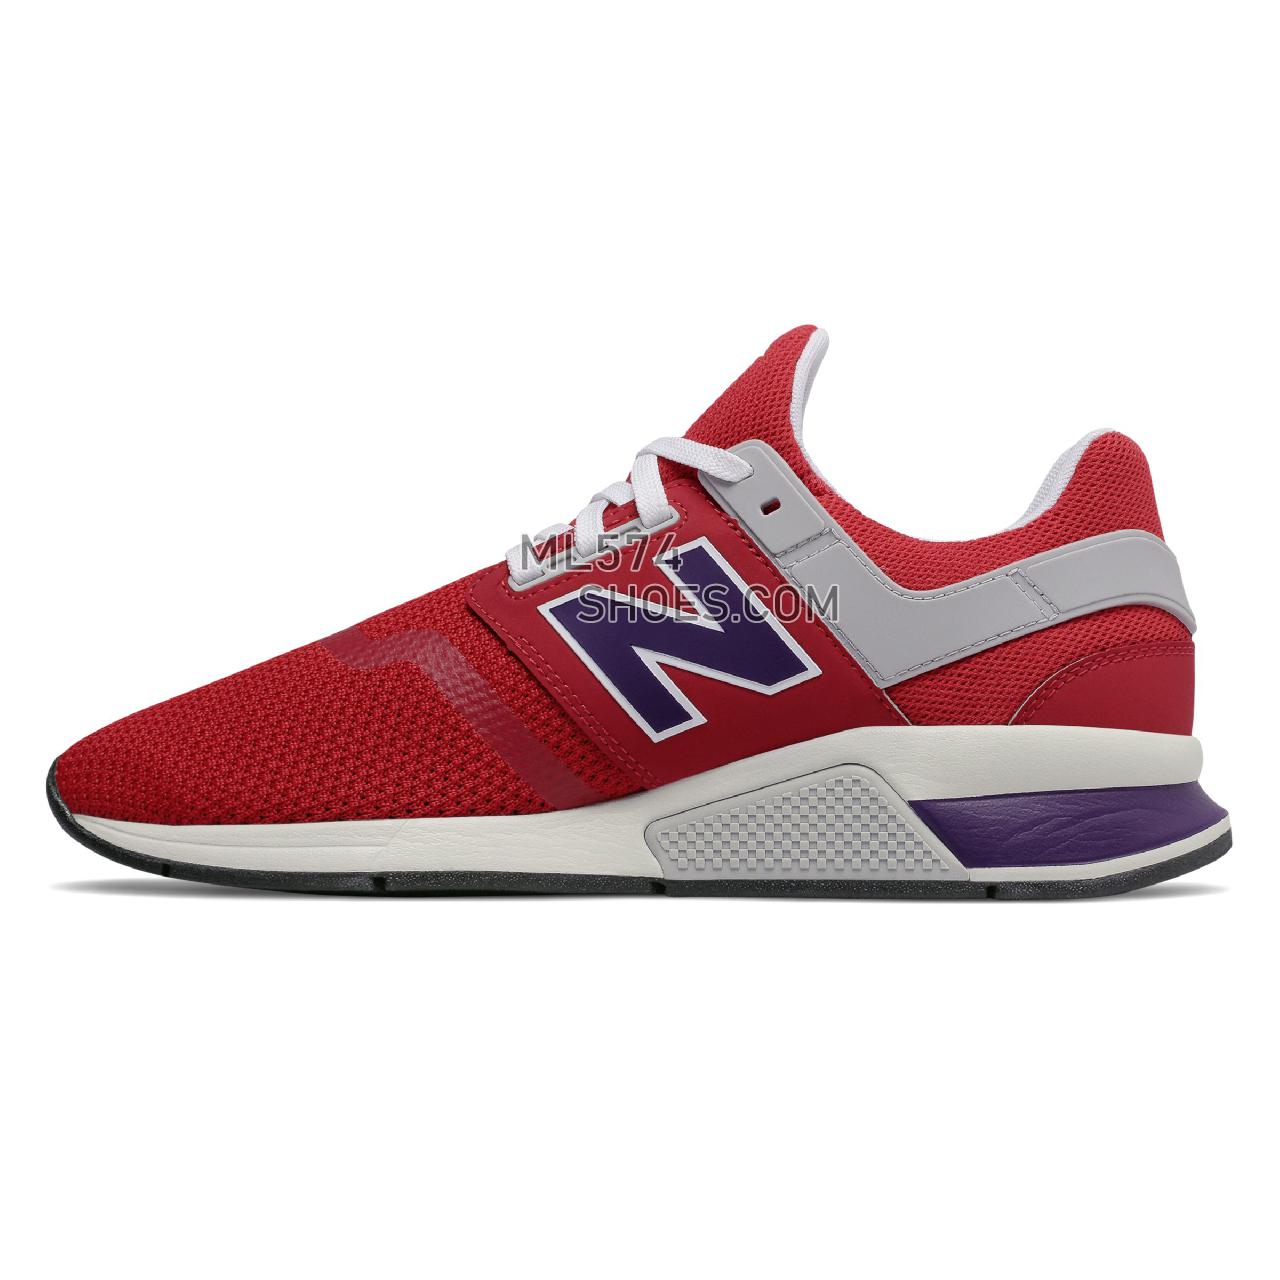 New Balance 247 - Men's 247 - Classic Tango Red with Parachute Purple - MS247NMT